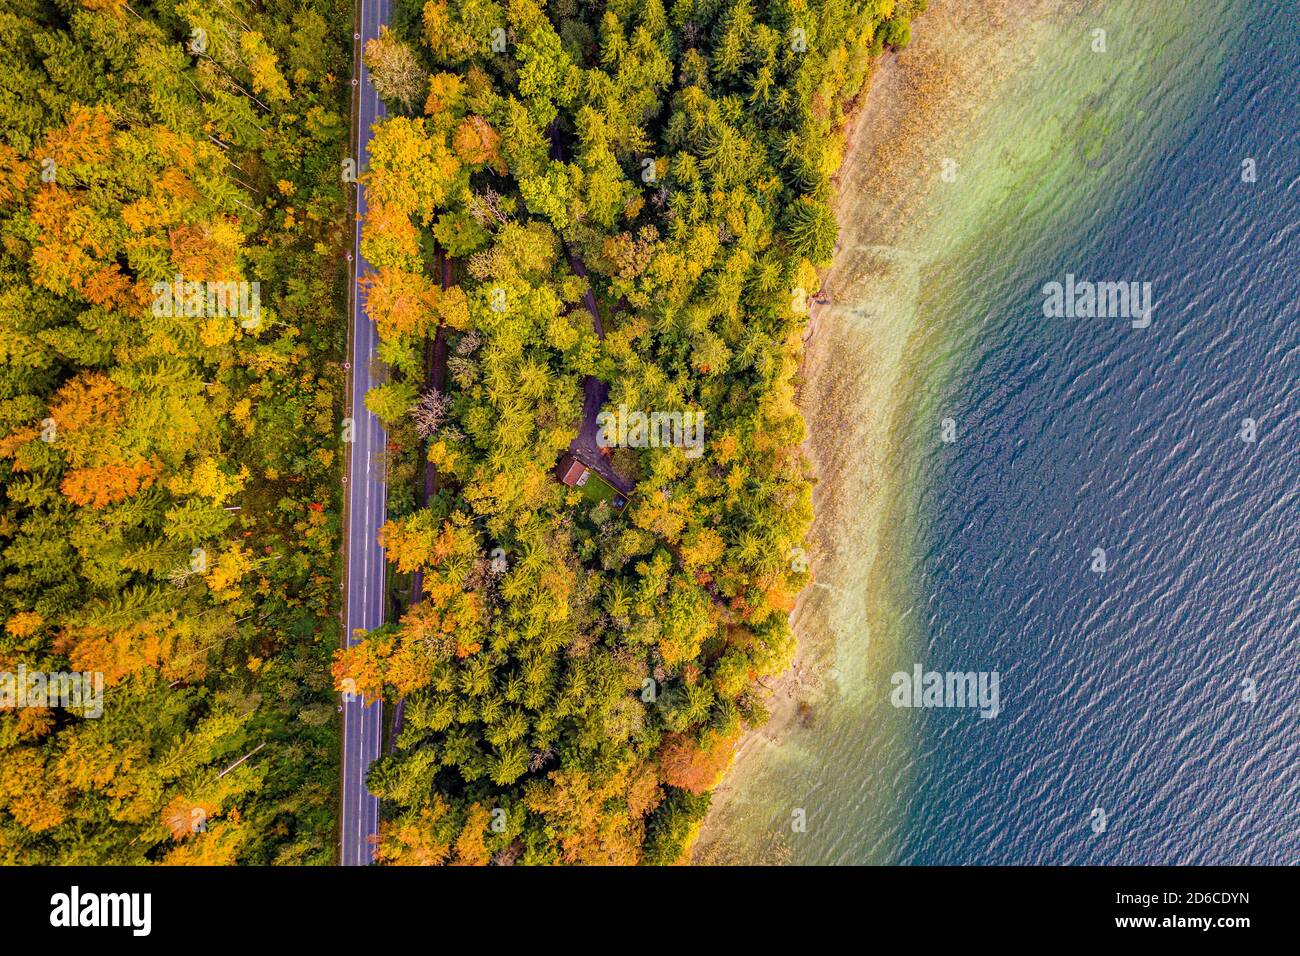 Autum Fall Top view from Drone of Lake Tegernsee and colorful Forest with trees. Lake Shore in Bavaria. Beutiful Aerial Photography Stock Photo